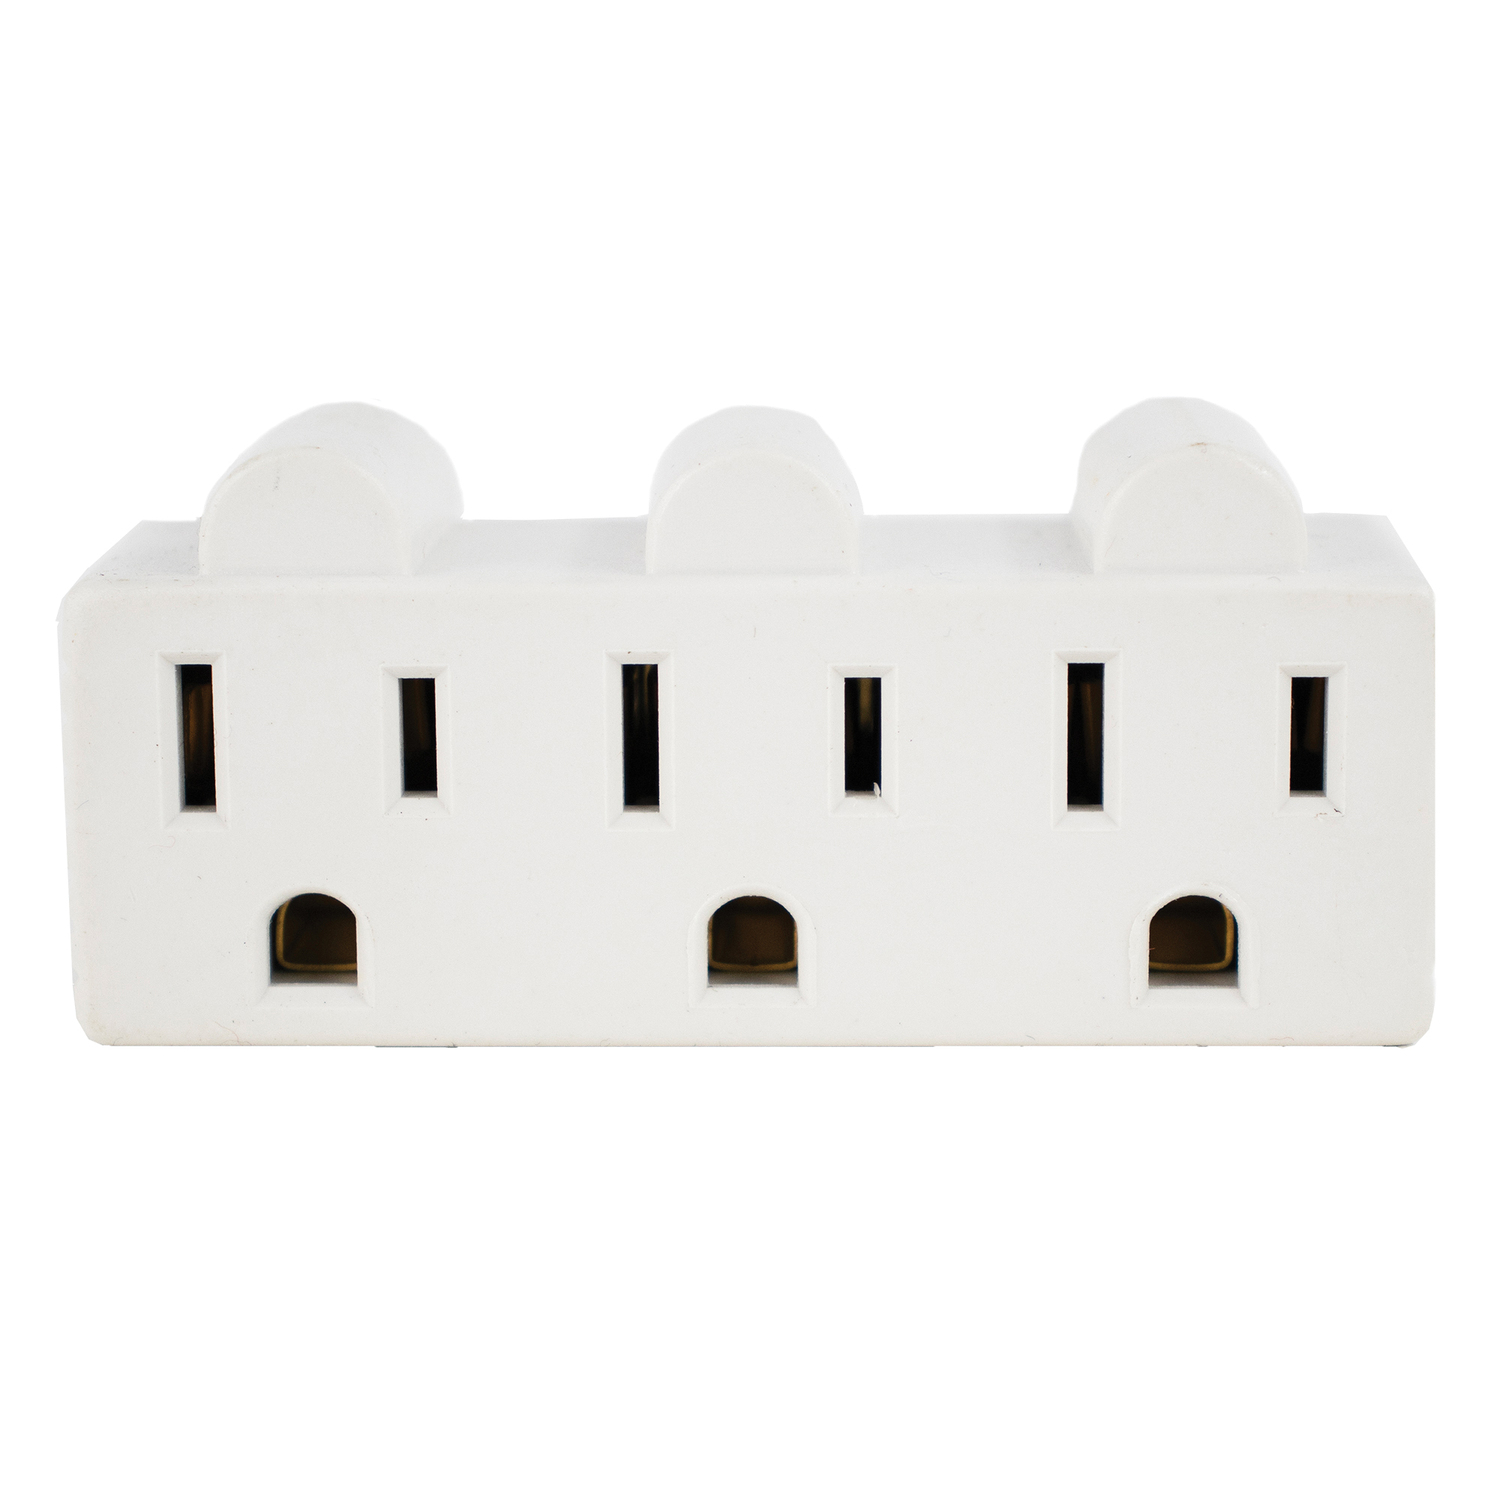 Axis 45090 3-Outlet Wall Adapter - image 1 of 14